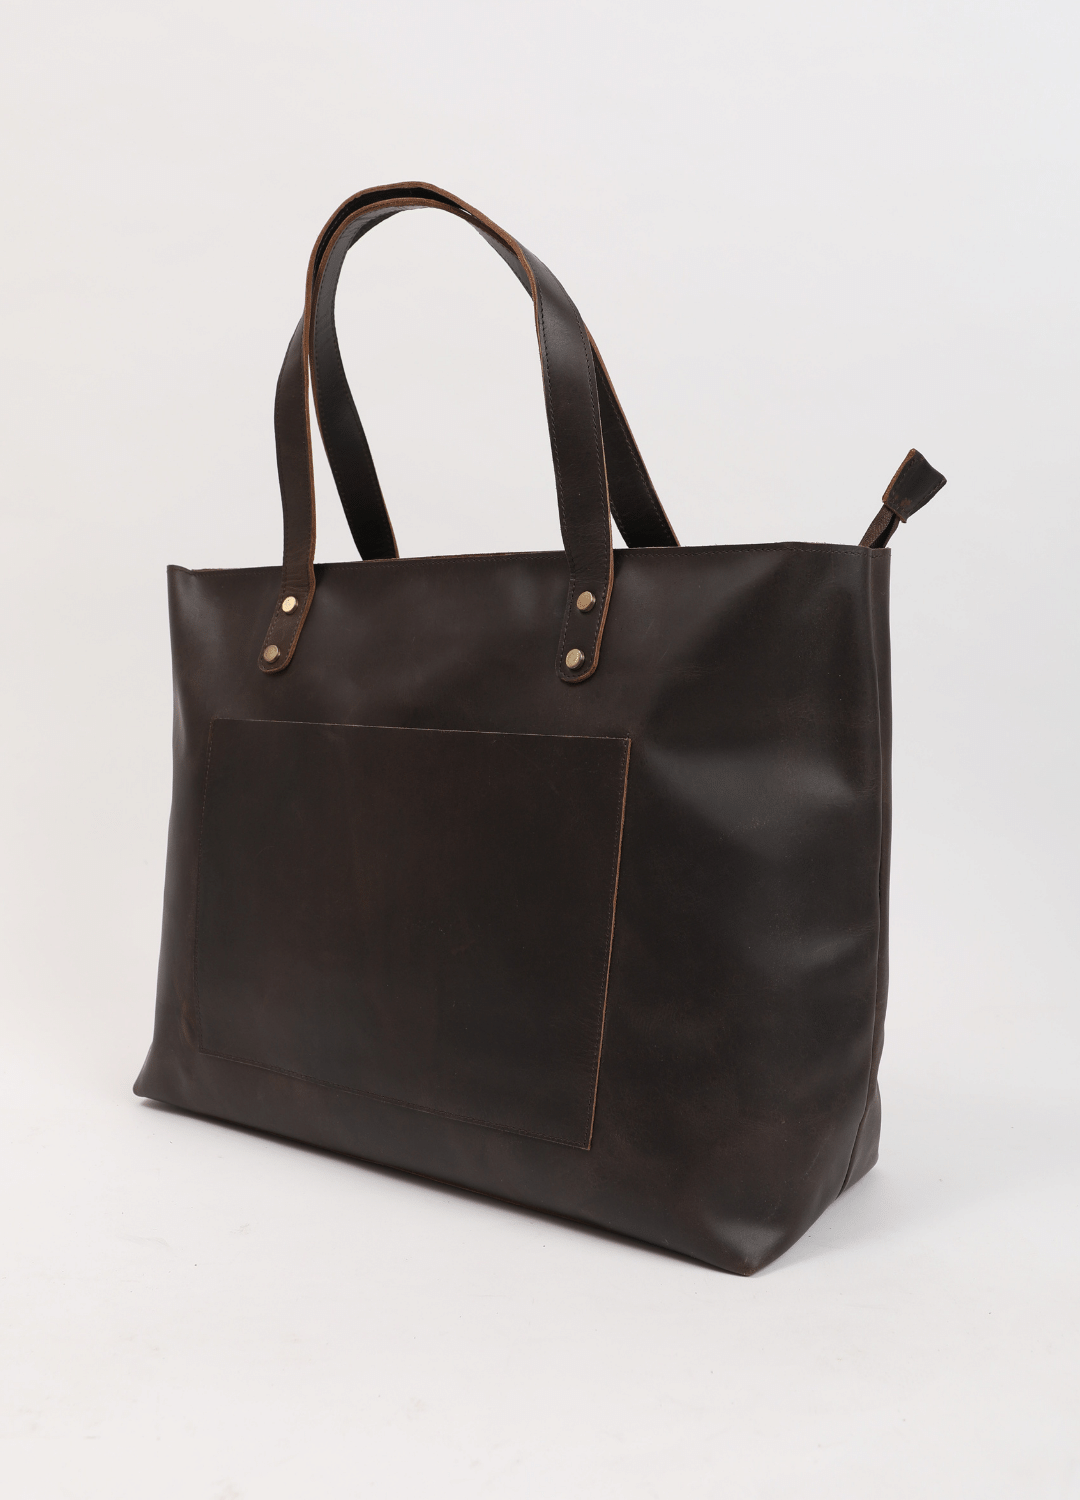 Classic Leather tote in Coffee